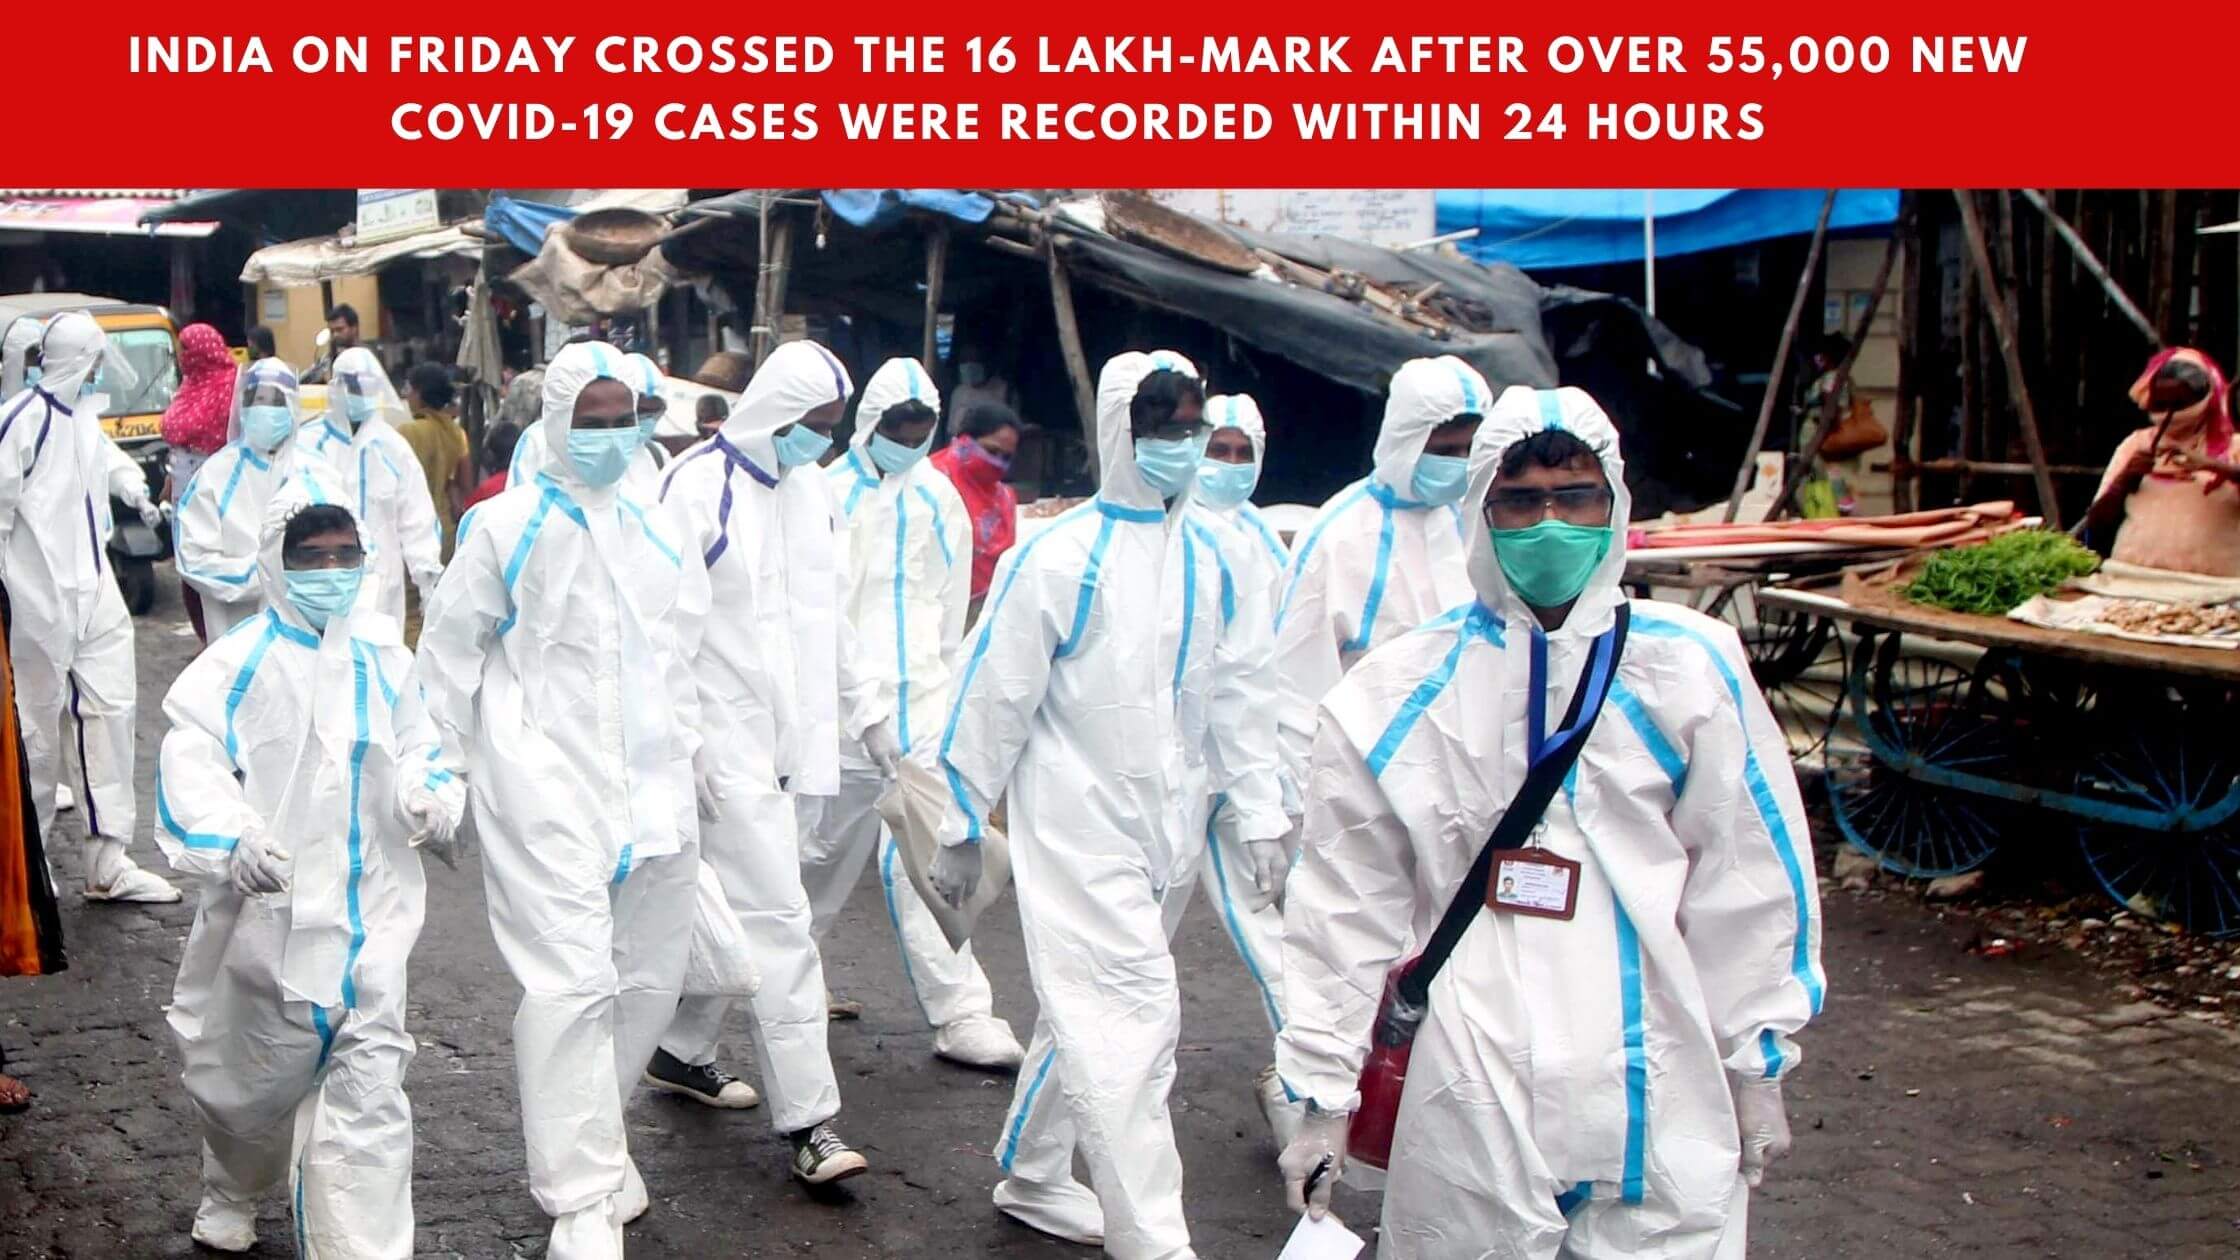 India on Friday crossed the 16 lakh-mark after over 55,000 New Covid-19 cases